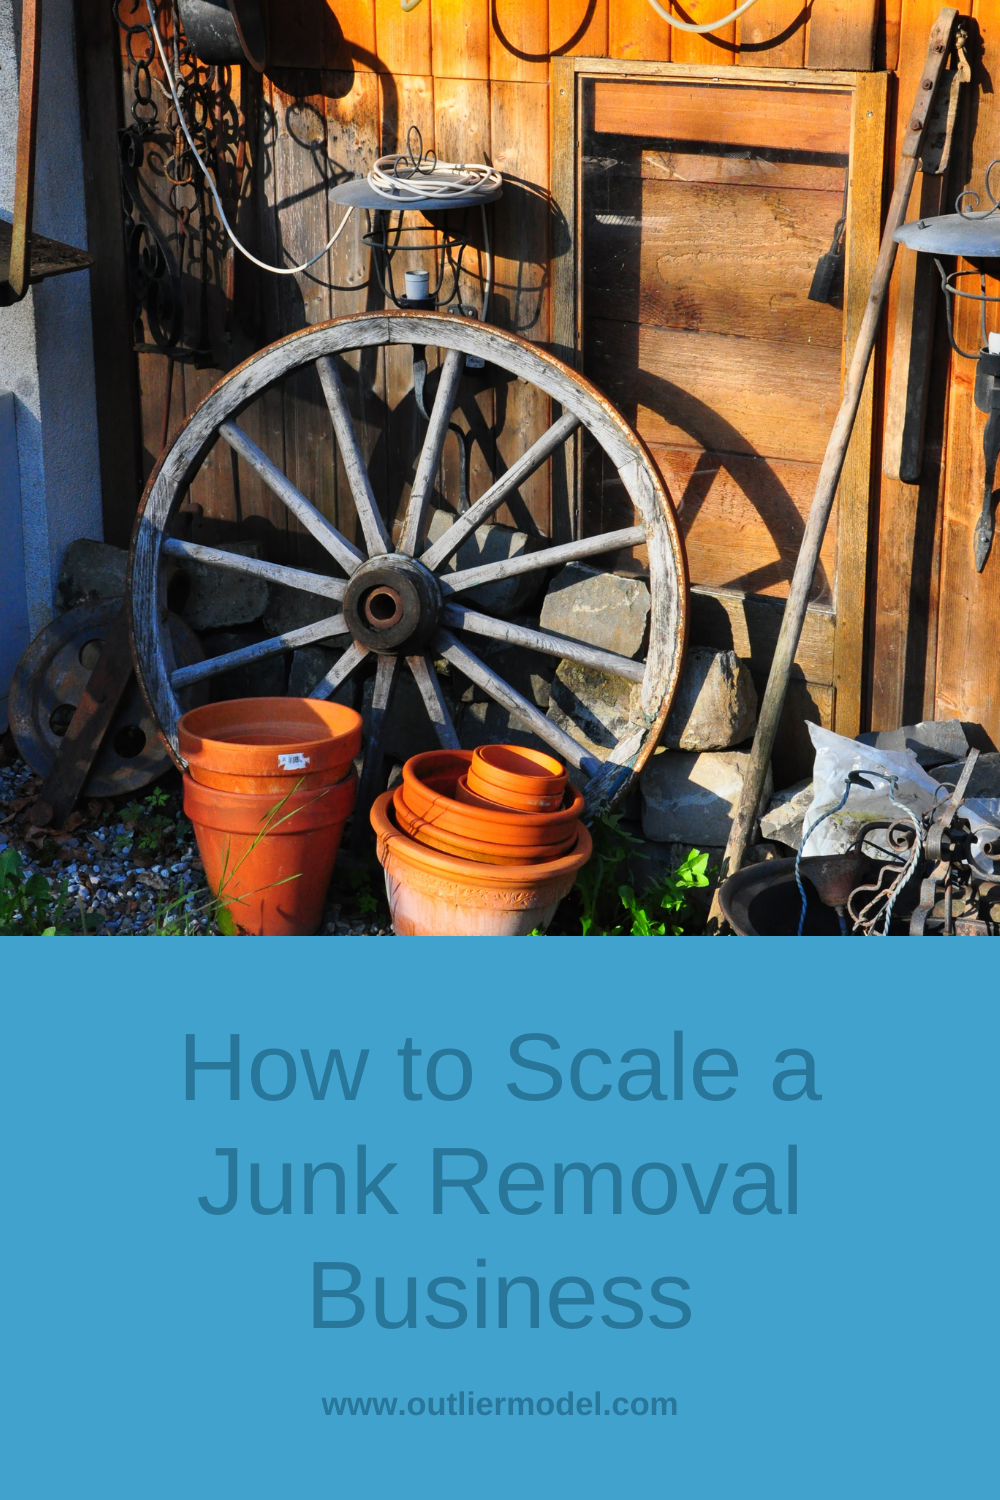 How to Scale a Junk Removal Business